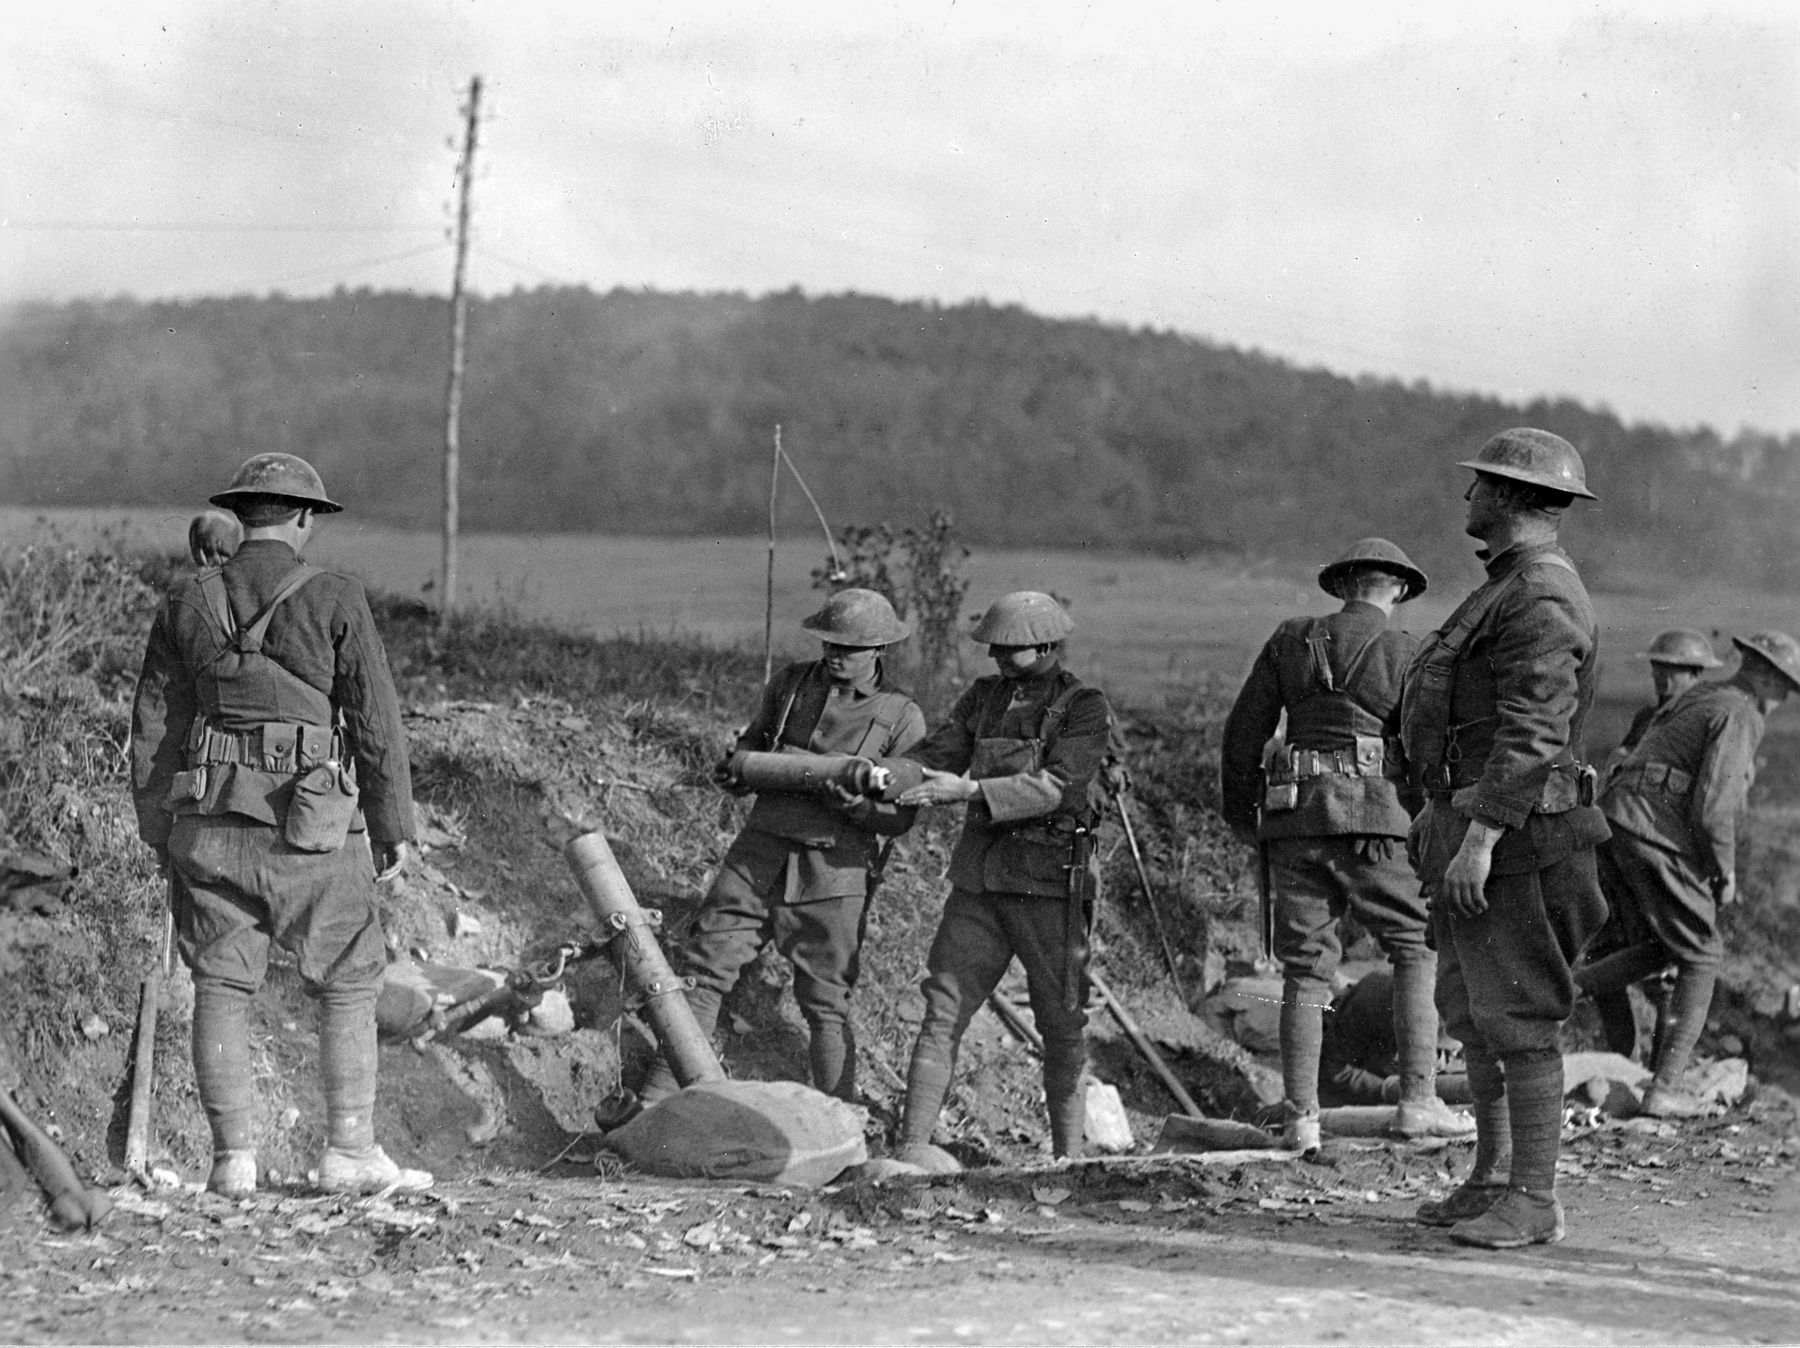 Members of a trench mortar battery in Company C, 1st Gas Regiment, 80th Division, load and fire phosphorous and Thermite shells near Le Neufour, France, on October 27, 1918.